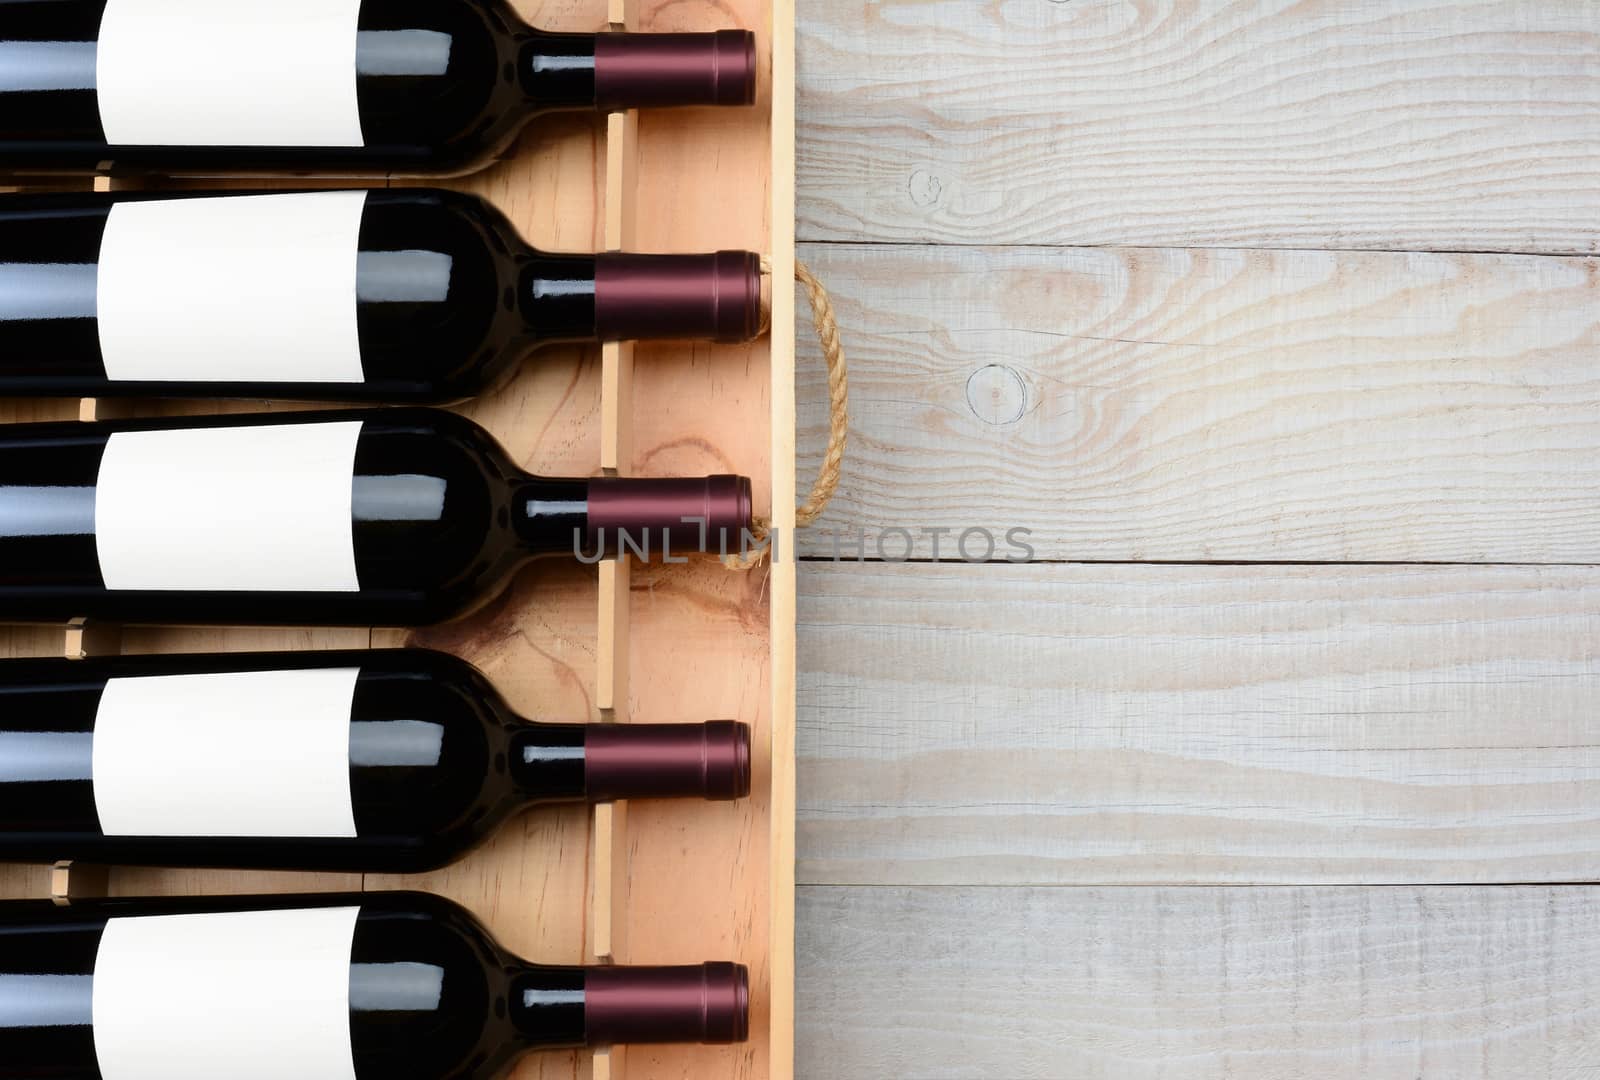 High angle shot of a case of red wine bottles with blank labels  on a rustic white wood table with copy space. Horizontal format.